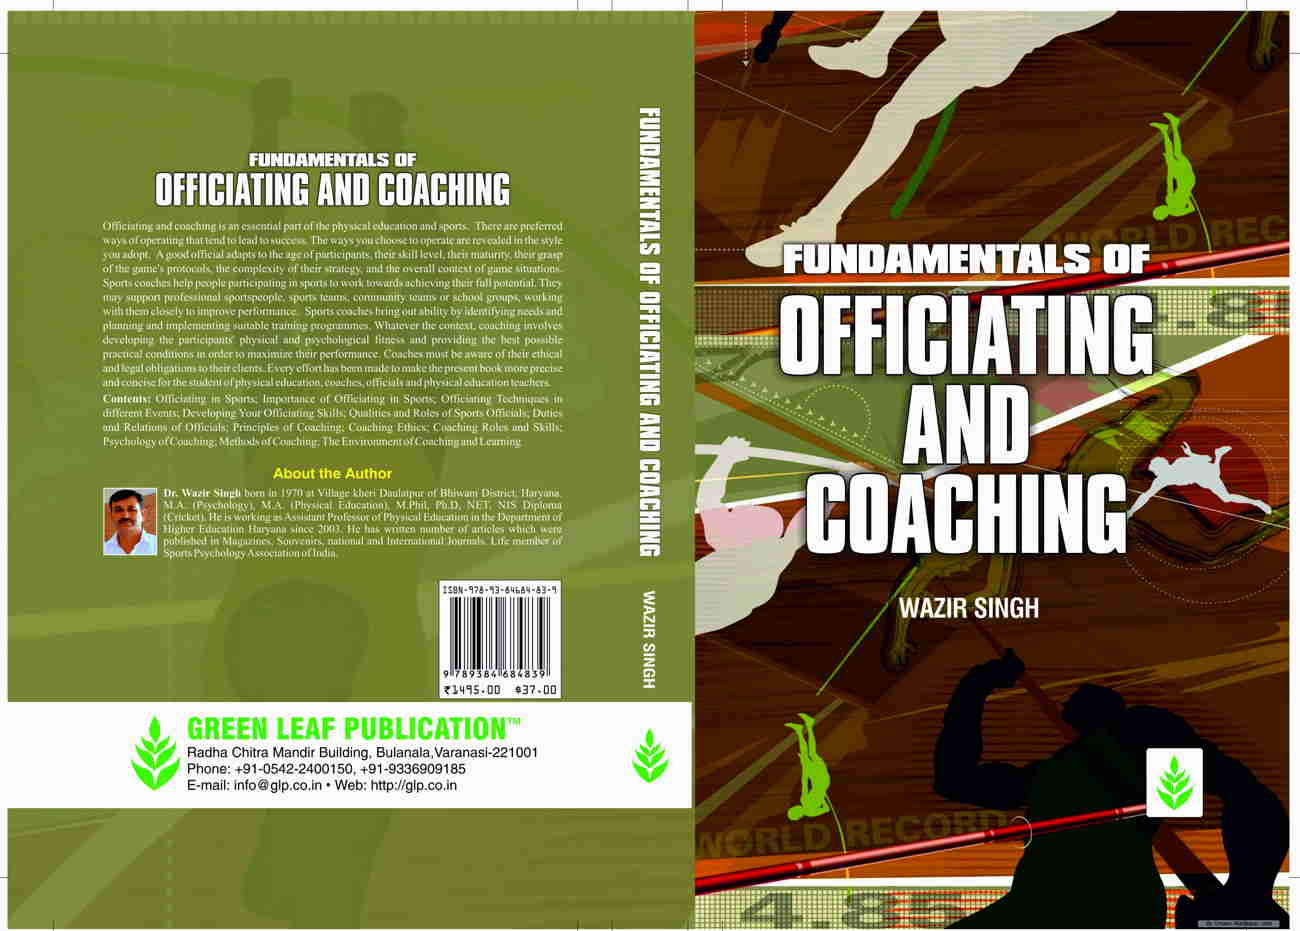 Fundamentals of Officiating and Coaching.jpg